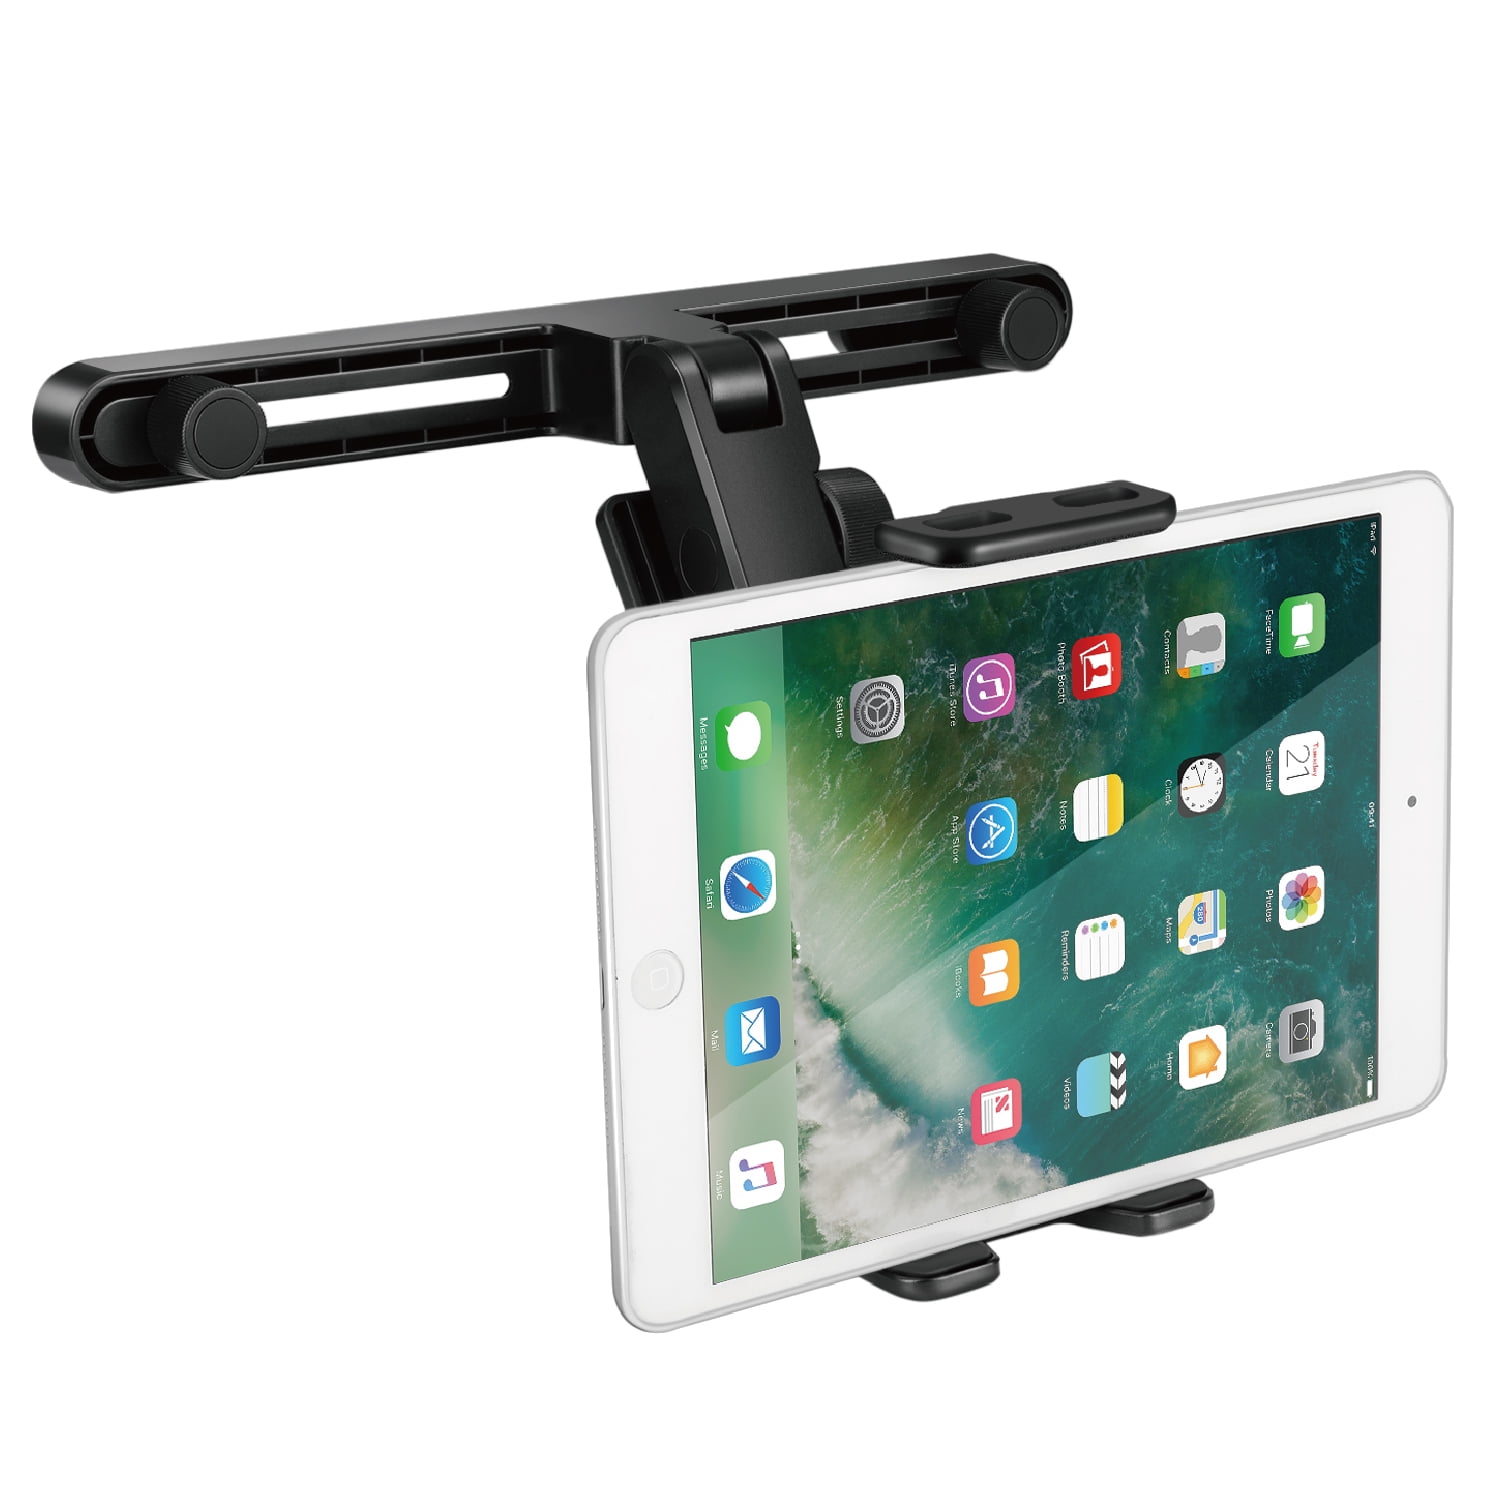 Ipad Air/Nano/Pro 9horn Universal Tablet Mount for Car Headrests 360° Rotating Cradle Holder Fire Galaxy Tab Fits Devices from 7 to 10.4 Inch for Smartphone 